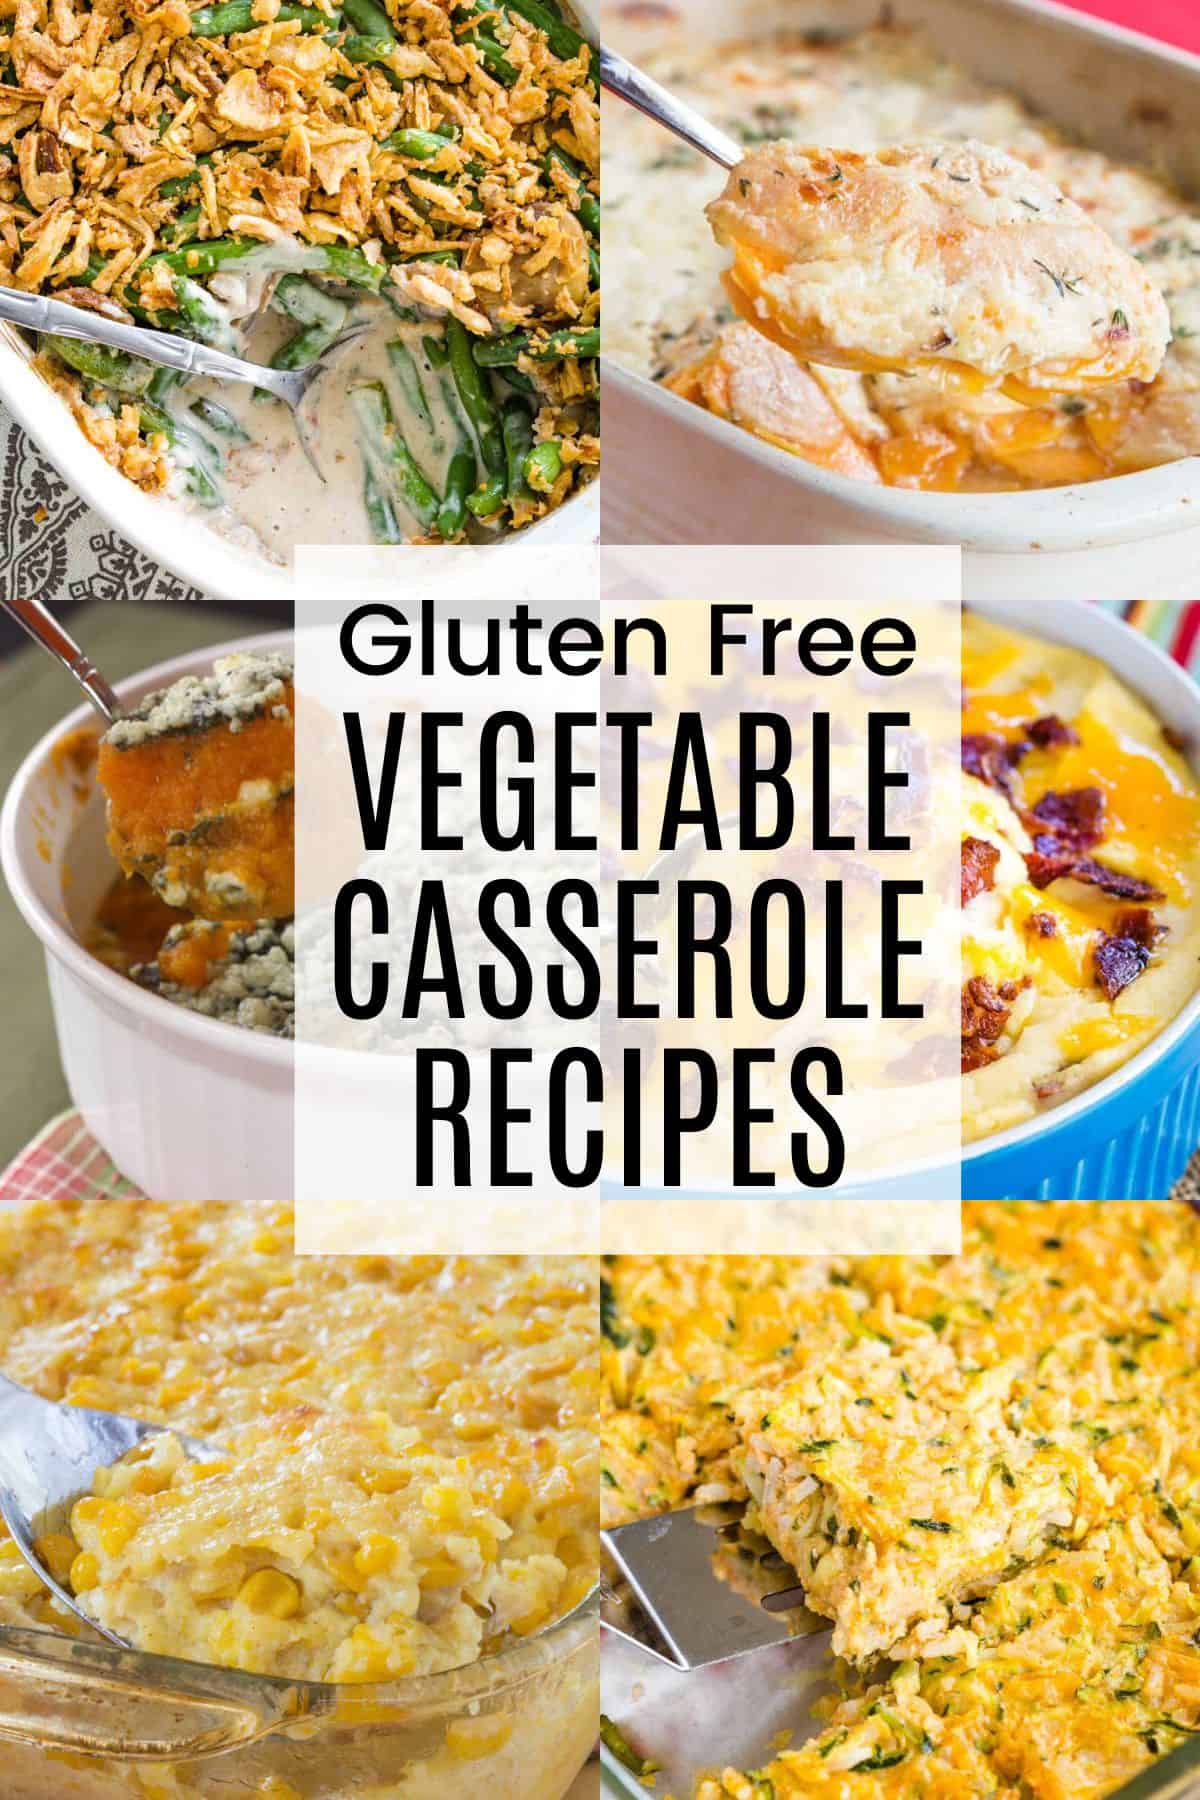 A two-by-three collage of green bean casserole, scalloped sweet potatoes, corn pudding, and more casseroles with a translucent white box in the middle with black text that says "Gluten Free Vegetable Casserole Recipes".